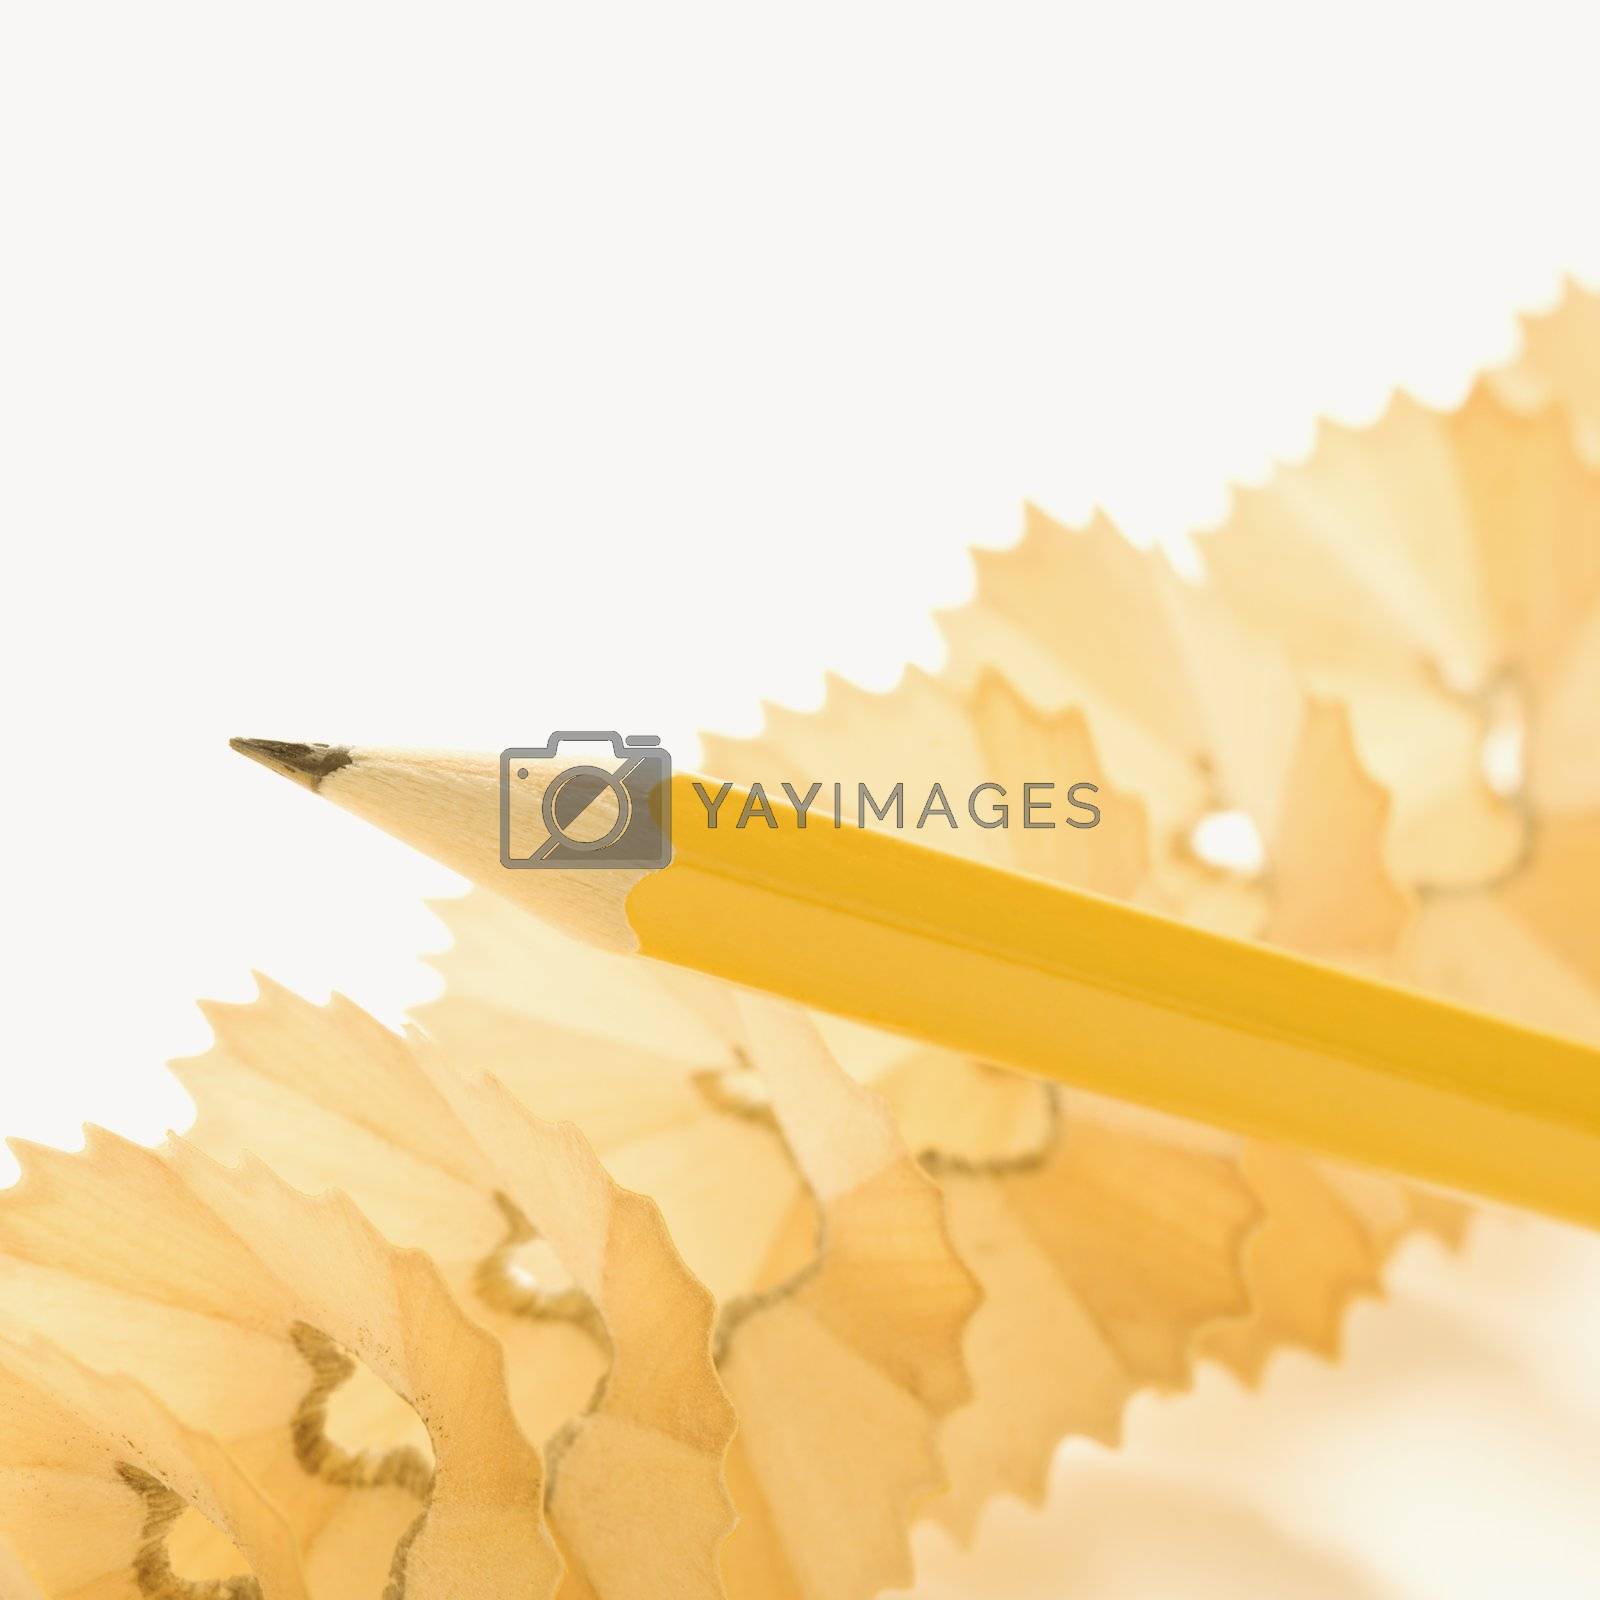 Royalty free image of Pencil and shavings. by iofoto